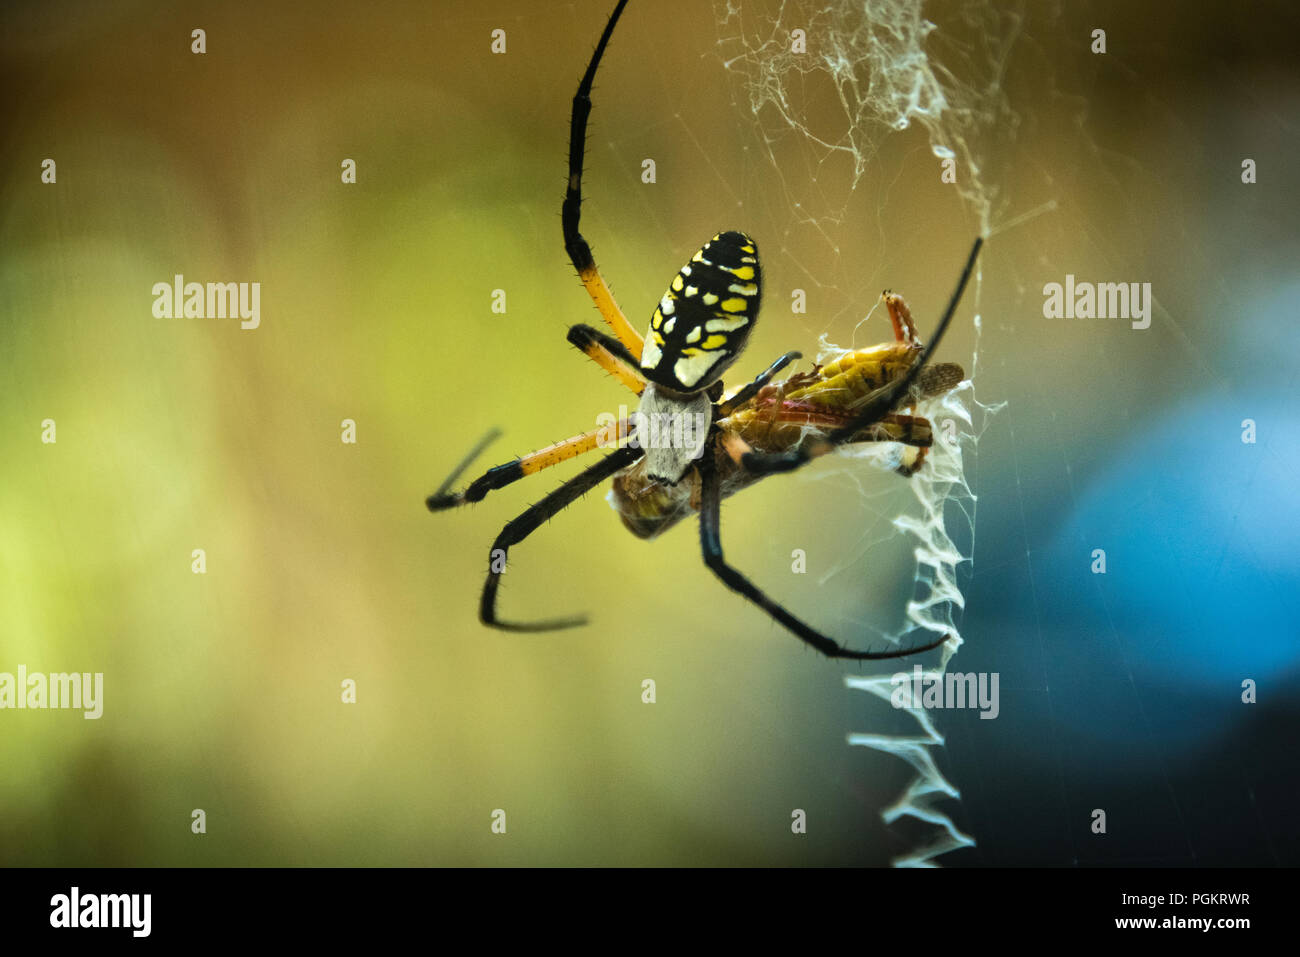 Black and yellow garden spider (Argiope aurantia), also known as a zipper spider or writing spider, wrapping and eating a captured grasshopper. Stock Photo